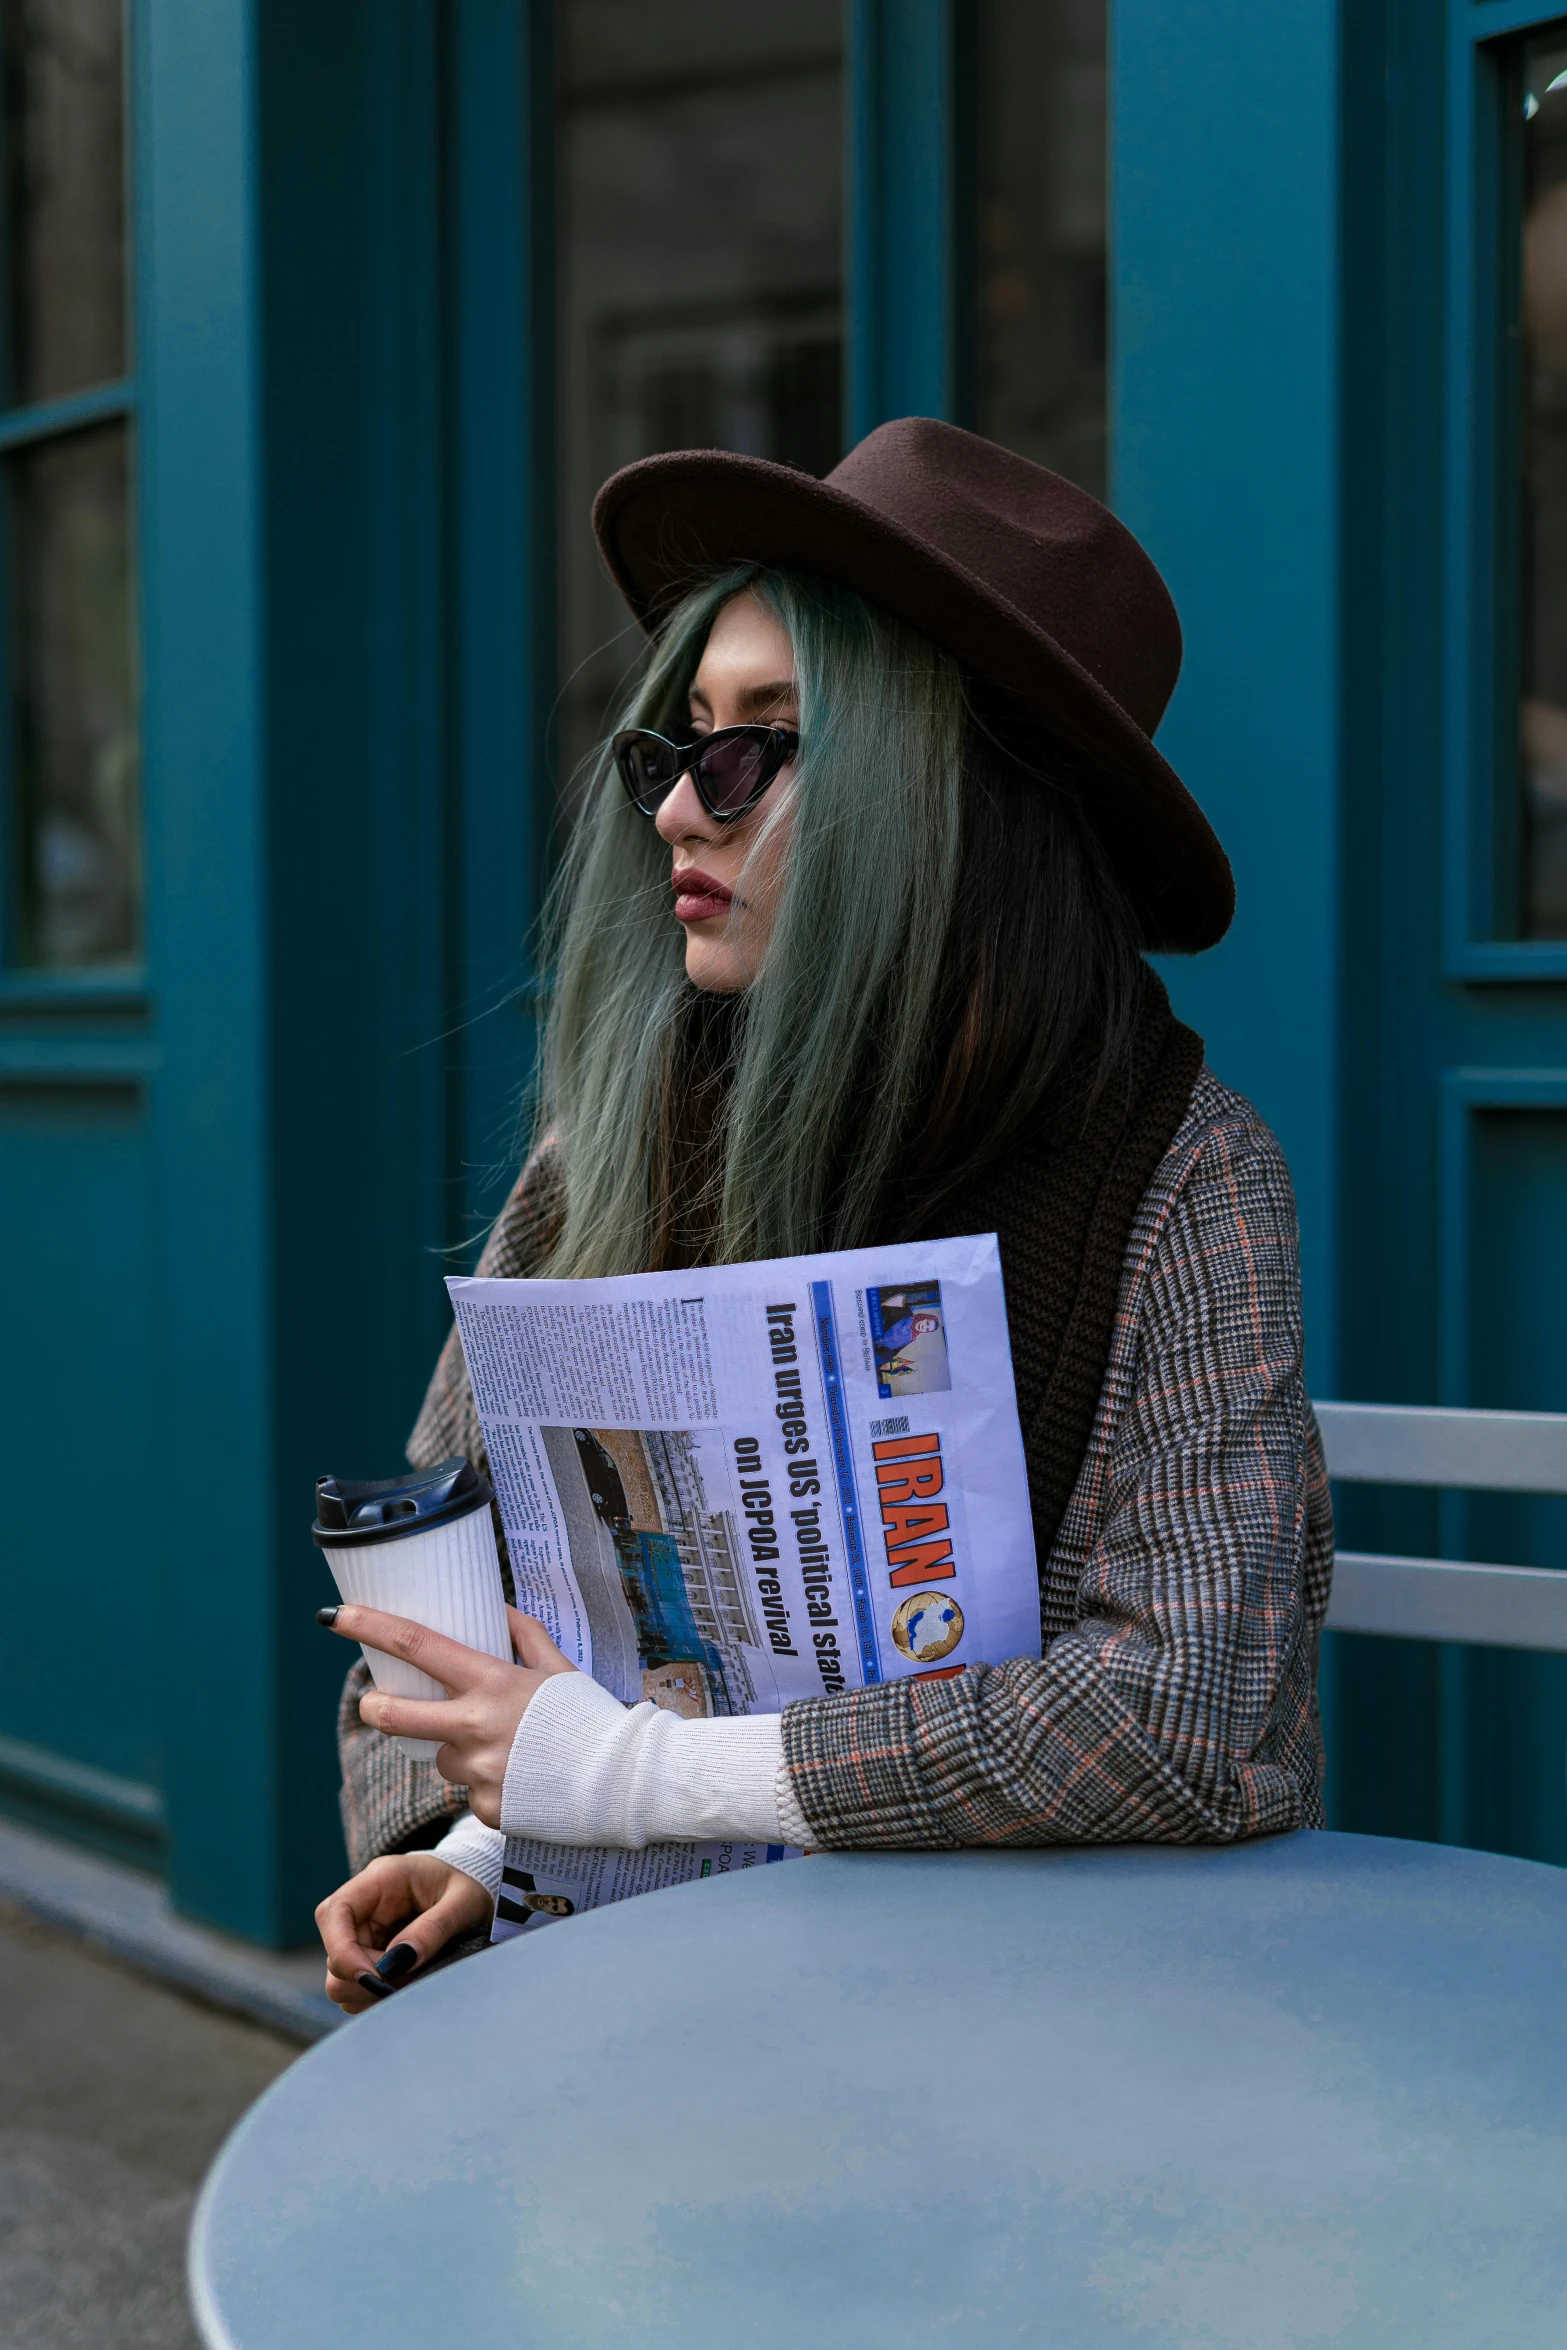 woman with a hat and sunglasses is sitting at a table reading the news